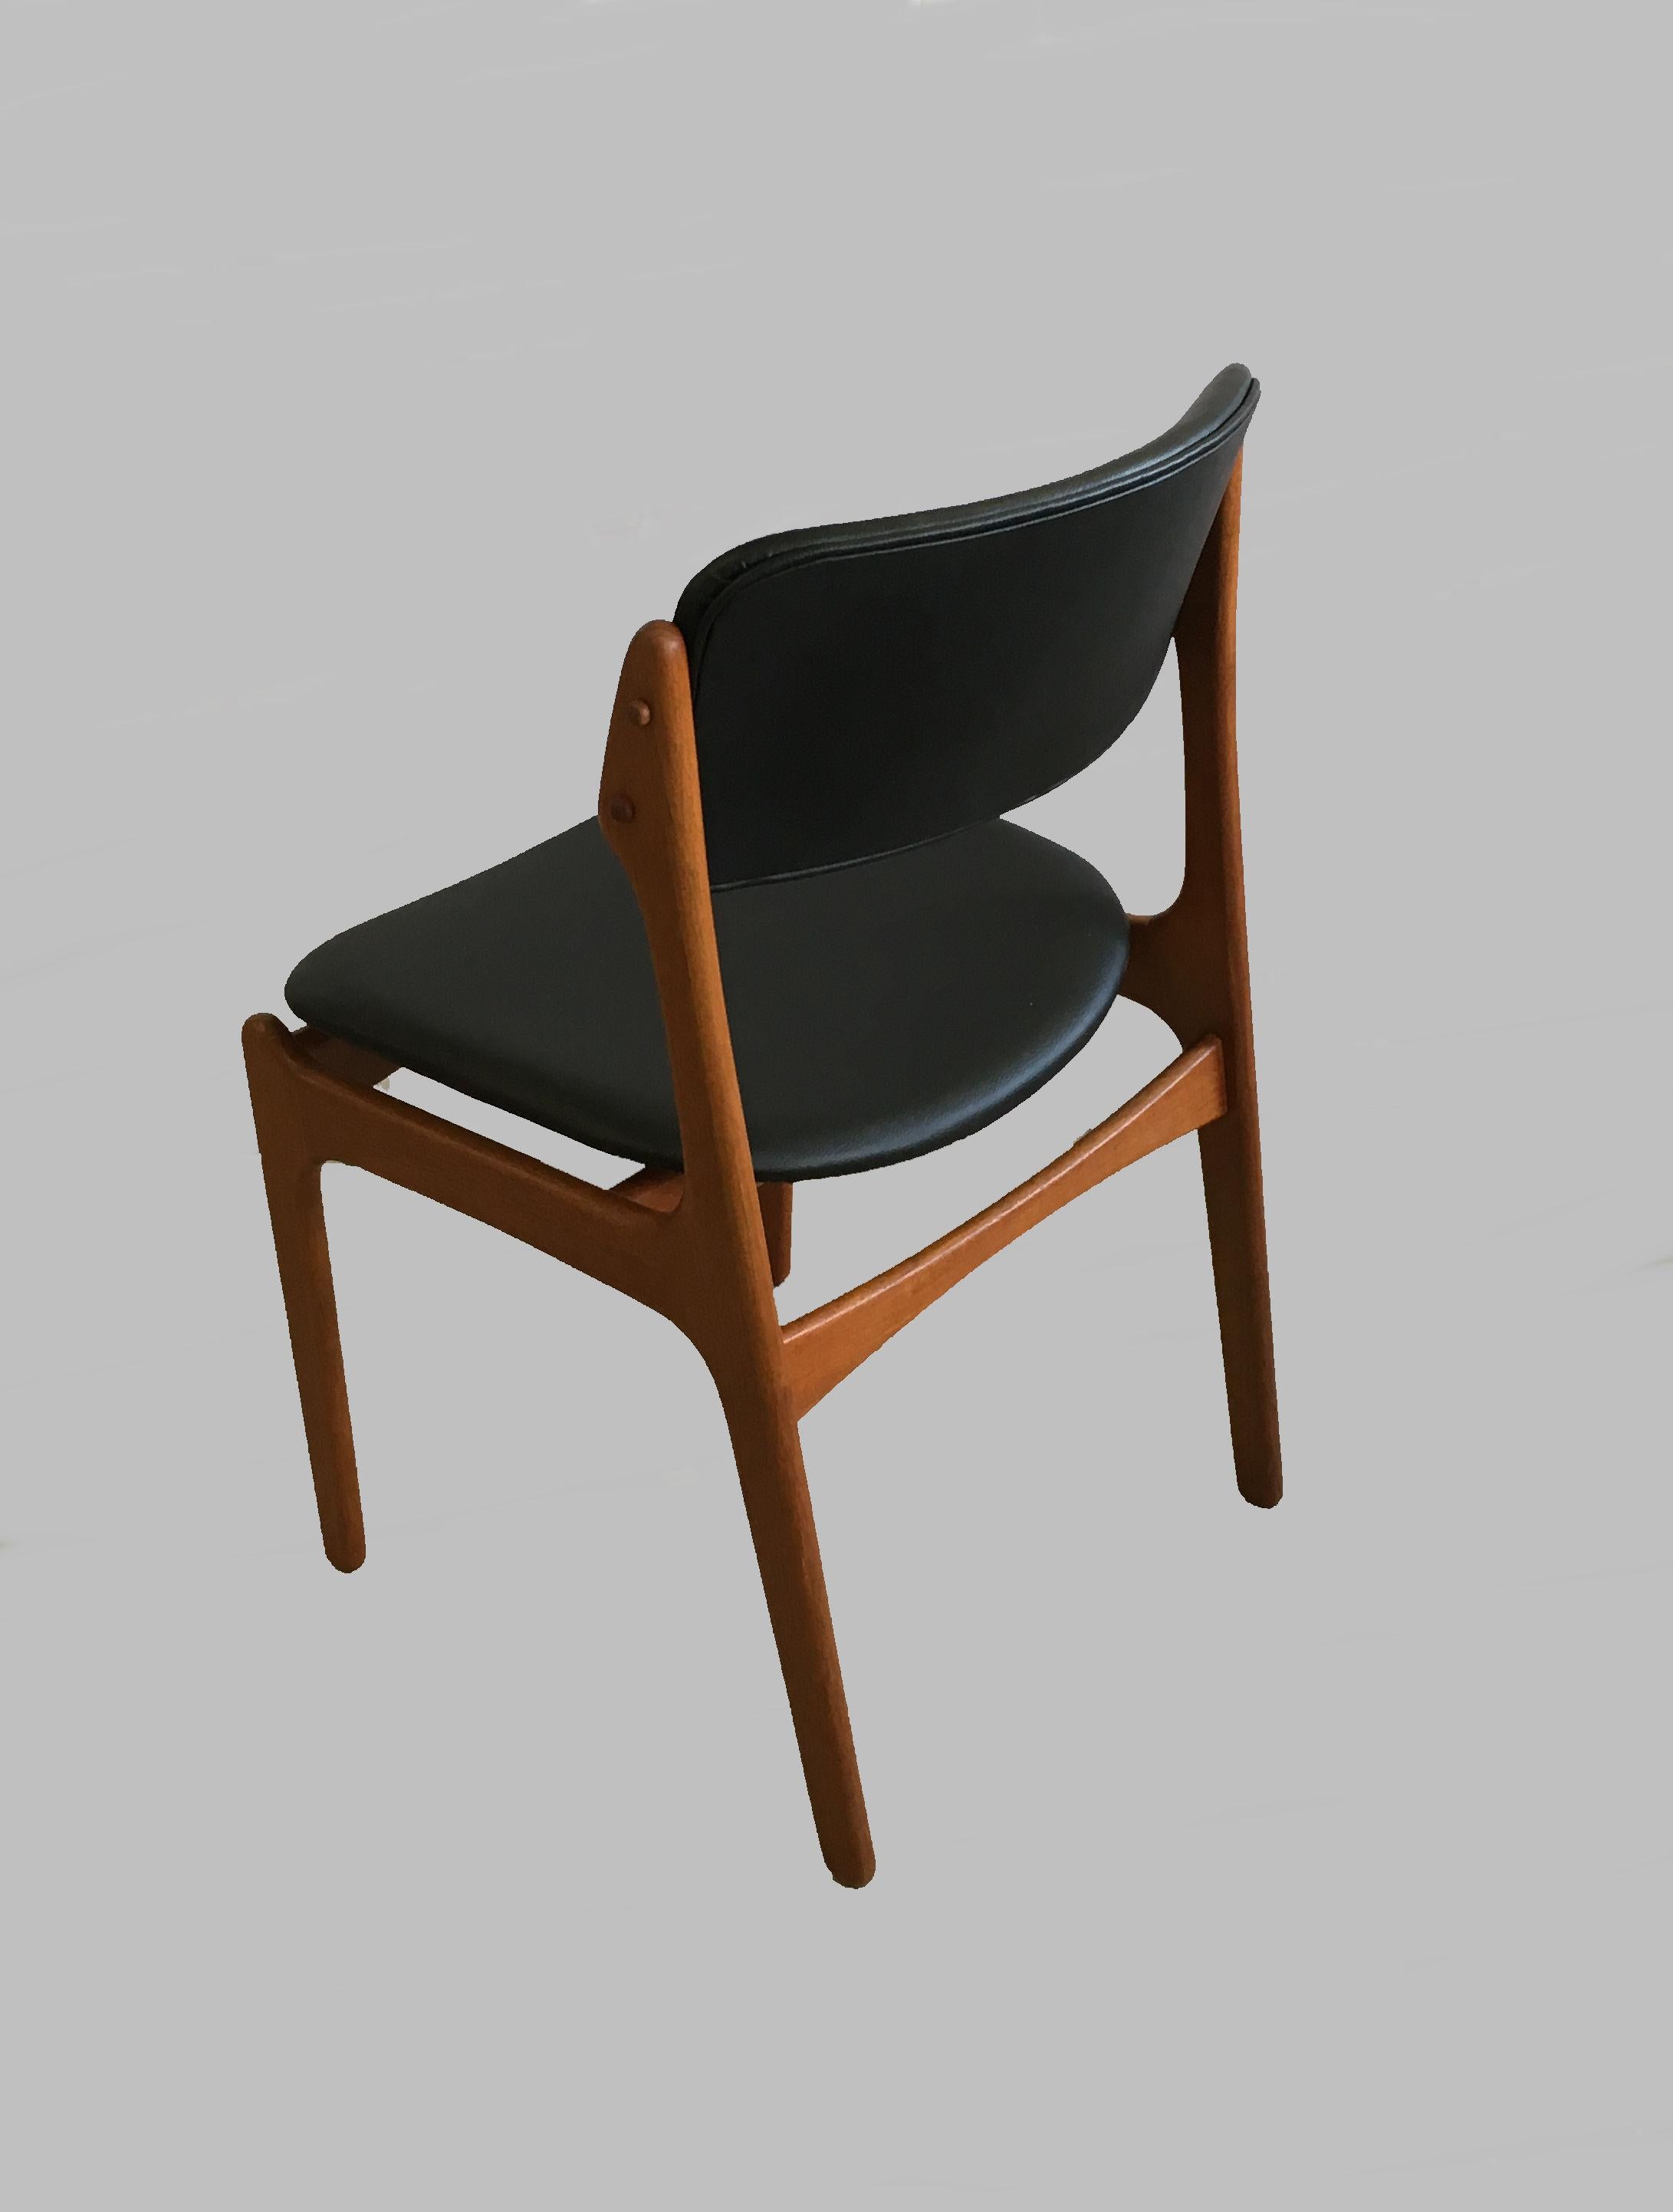 Six Fully Restored Erik Buch Teak Dining Chairs, Reupholstered in Black Leather In Good Condition For Sale In Knebel, DK